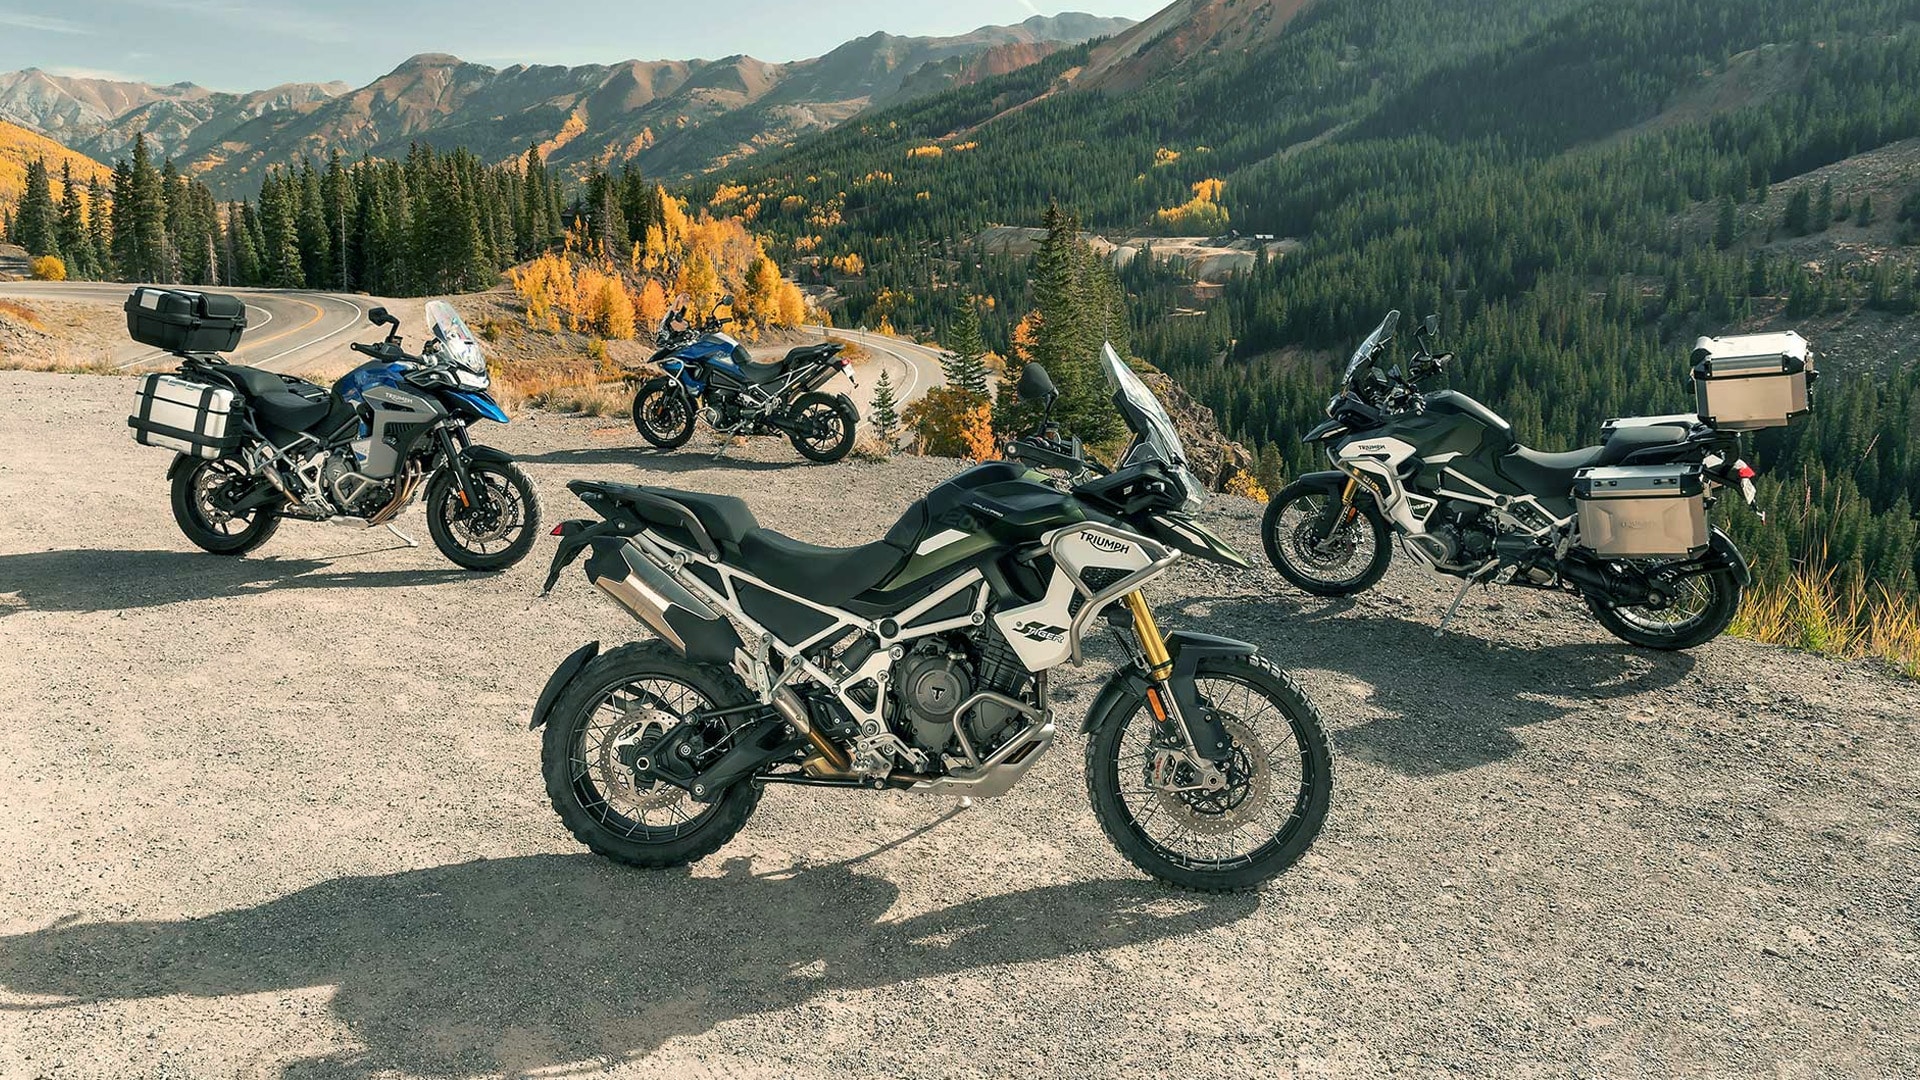 Triumph launches all-new Tiger 1200 adventure motorcycle in four variants